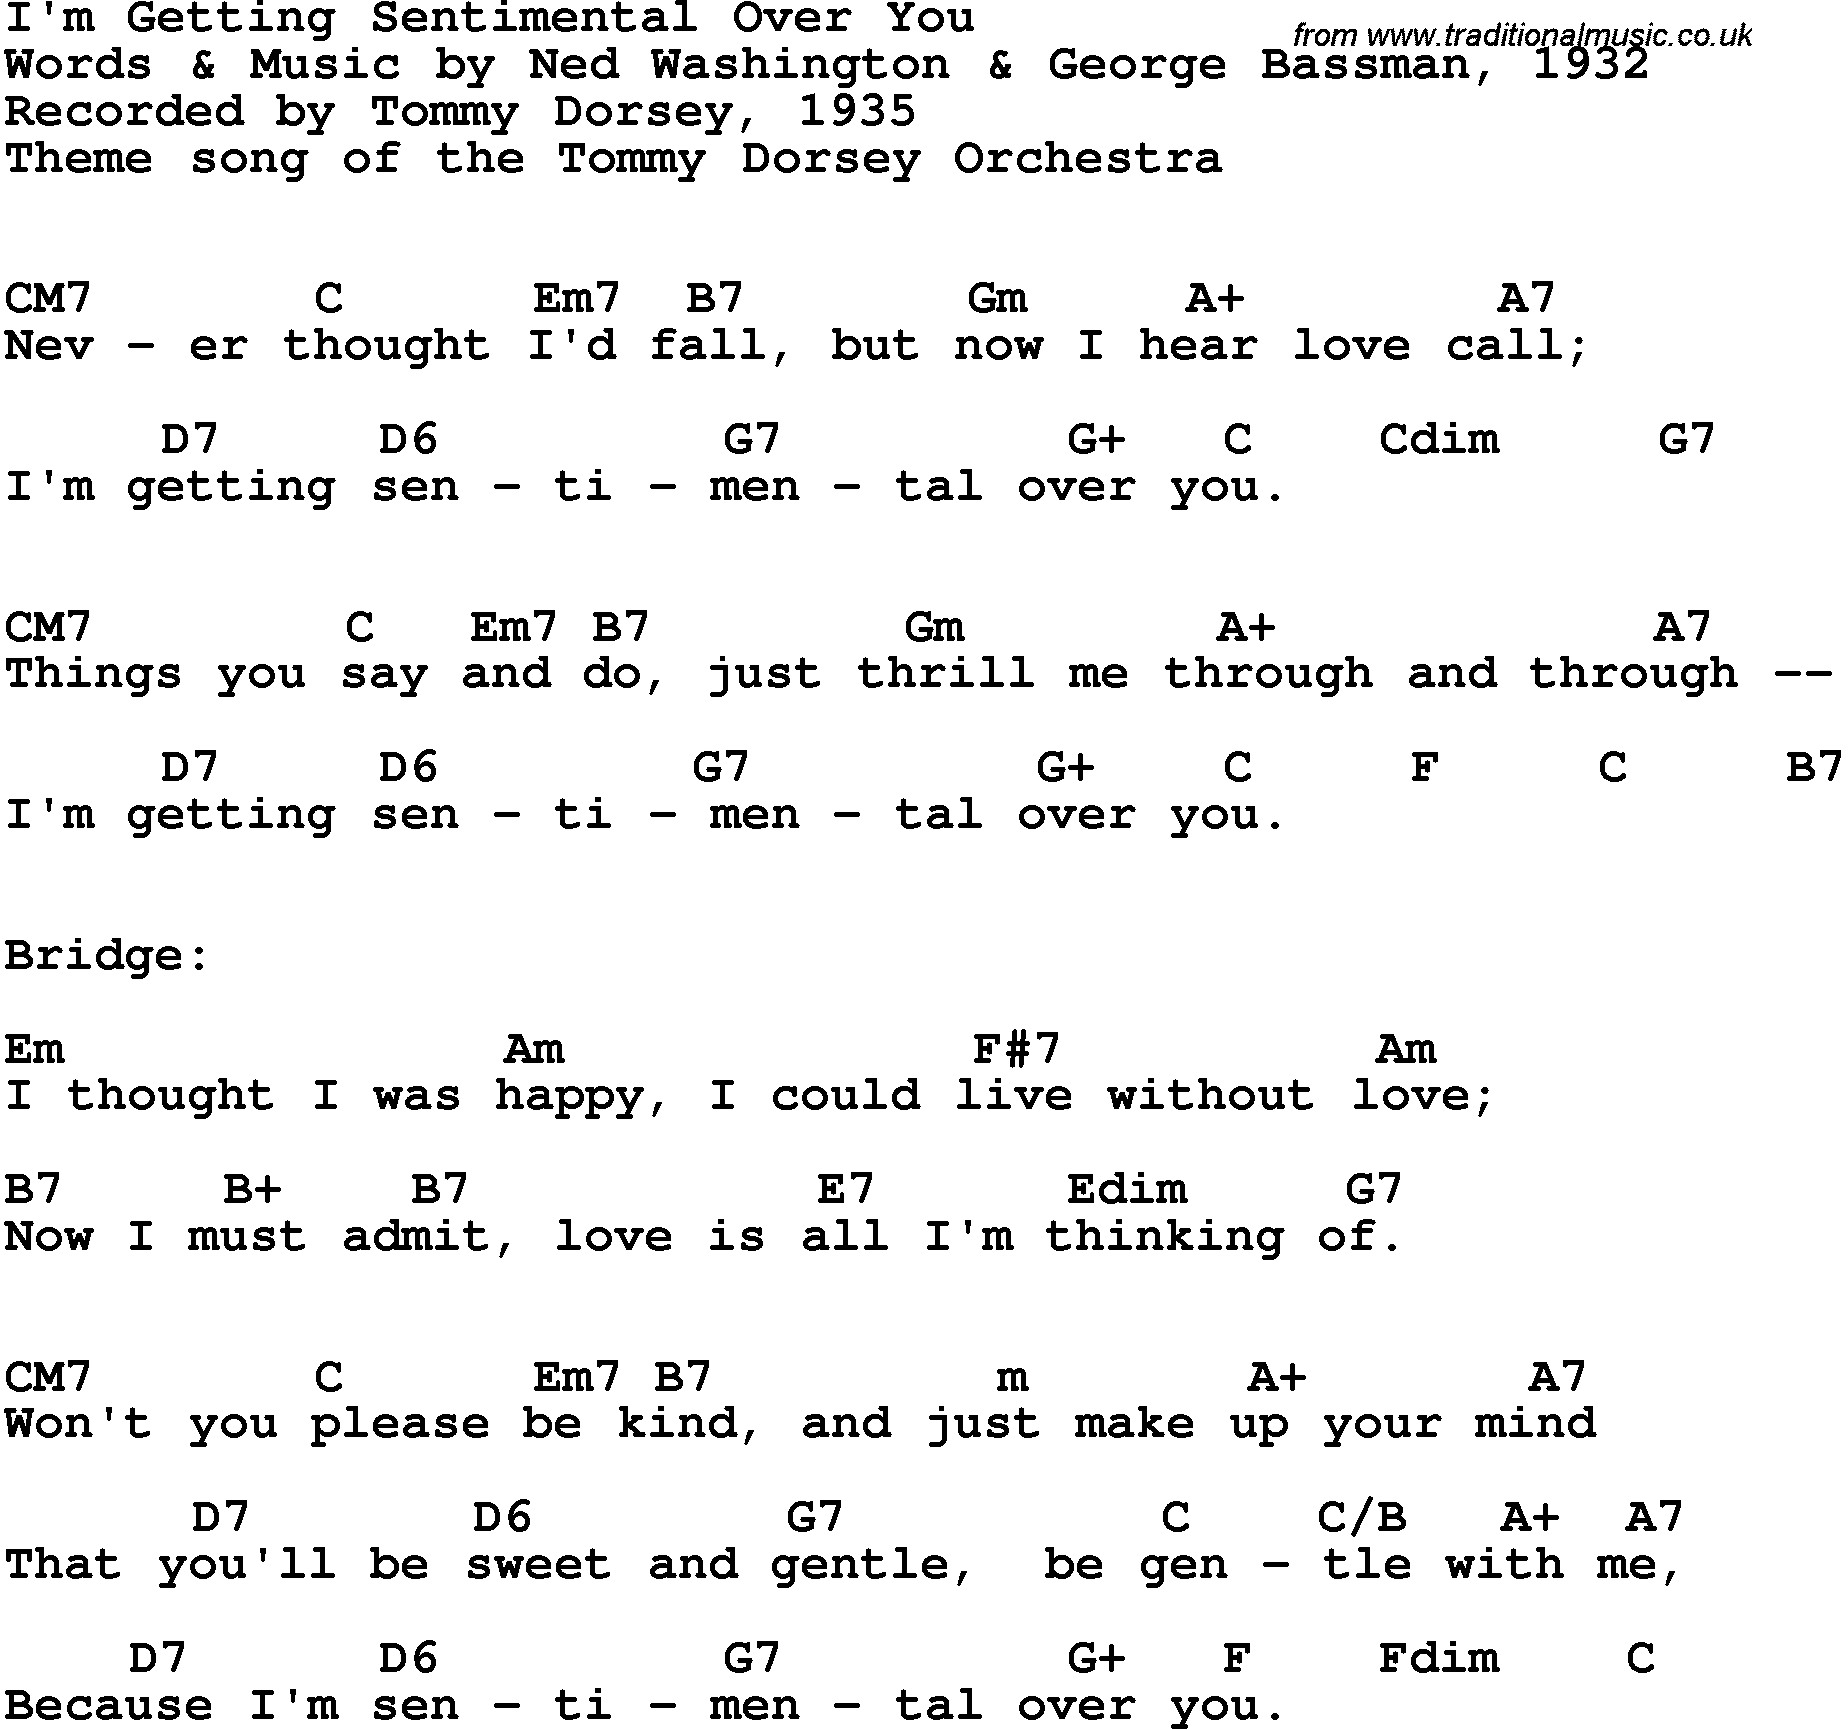 Song Lyrics with guitar chords for I'm Getting Sentimental Over You - Tommy Dorsey, 1935